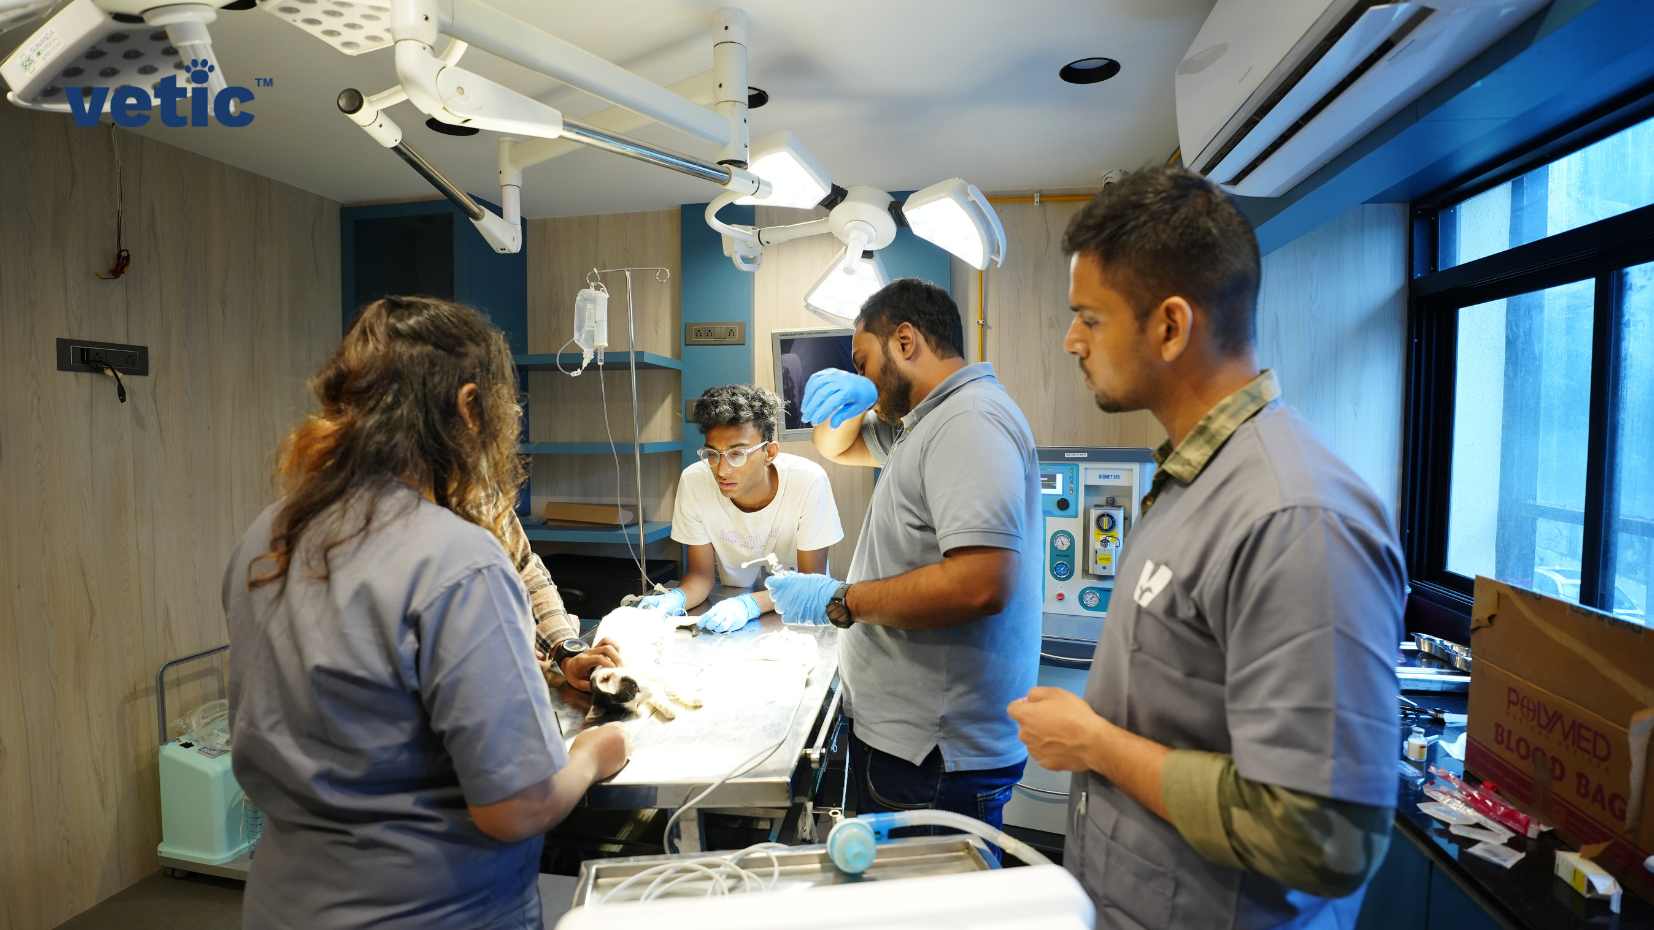 The image depicts a medical scene where individuals are attending to a patient (puppy). The setting is a well-lit medical room with modern equipment. Four individuals in medical attire are present, their faces are obscured. They appear to be attending to a patient who is lying on an examination table. Medical equipment, including overhead lights and monitors, is visible. A window is visible in the background, letting in natural light. A box labeled “BIOHAZARD BLOOD BAG” is seen on the right side of the image. To find the best dog groomer near you.